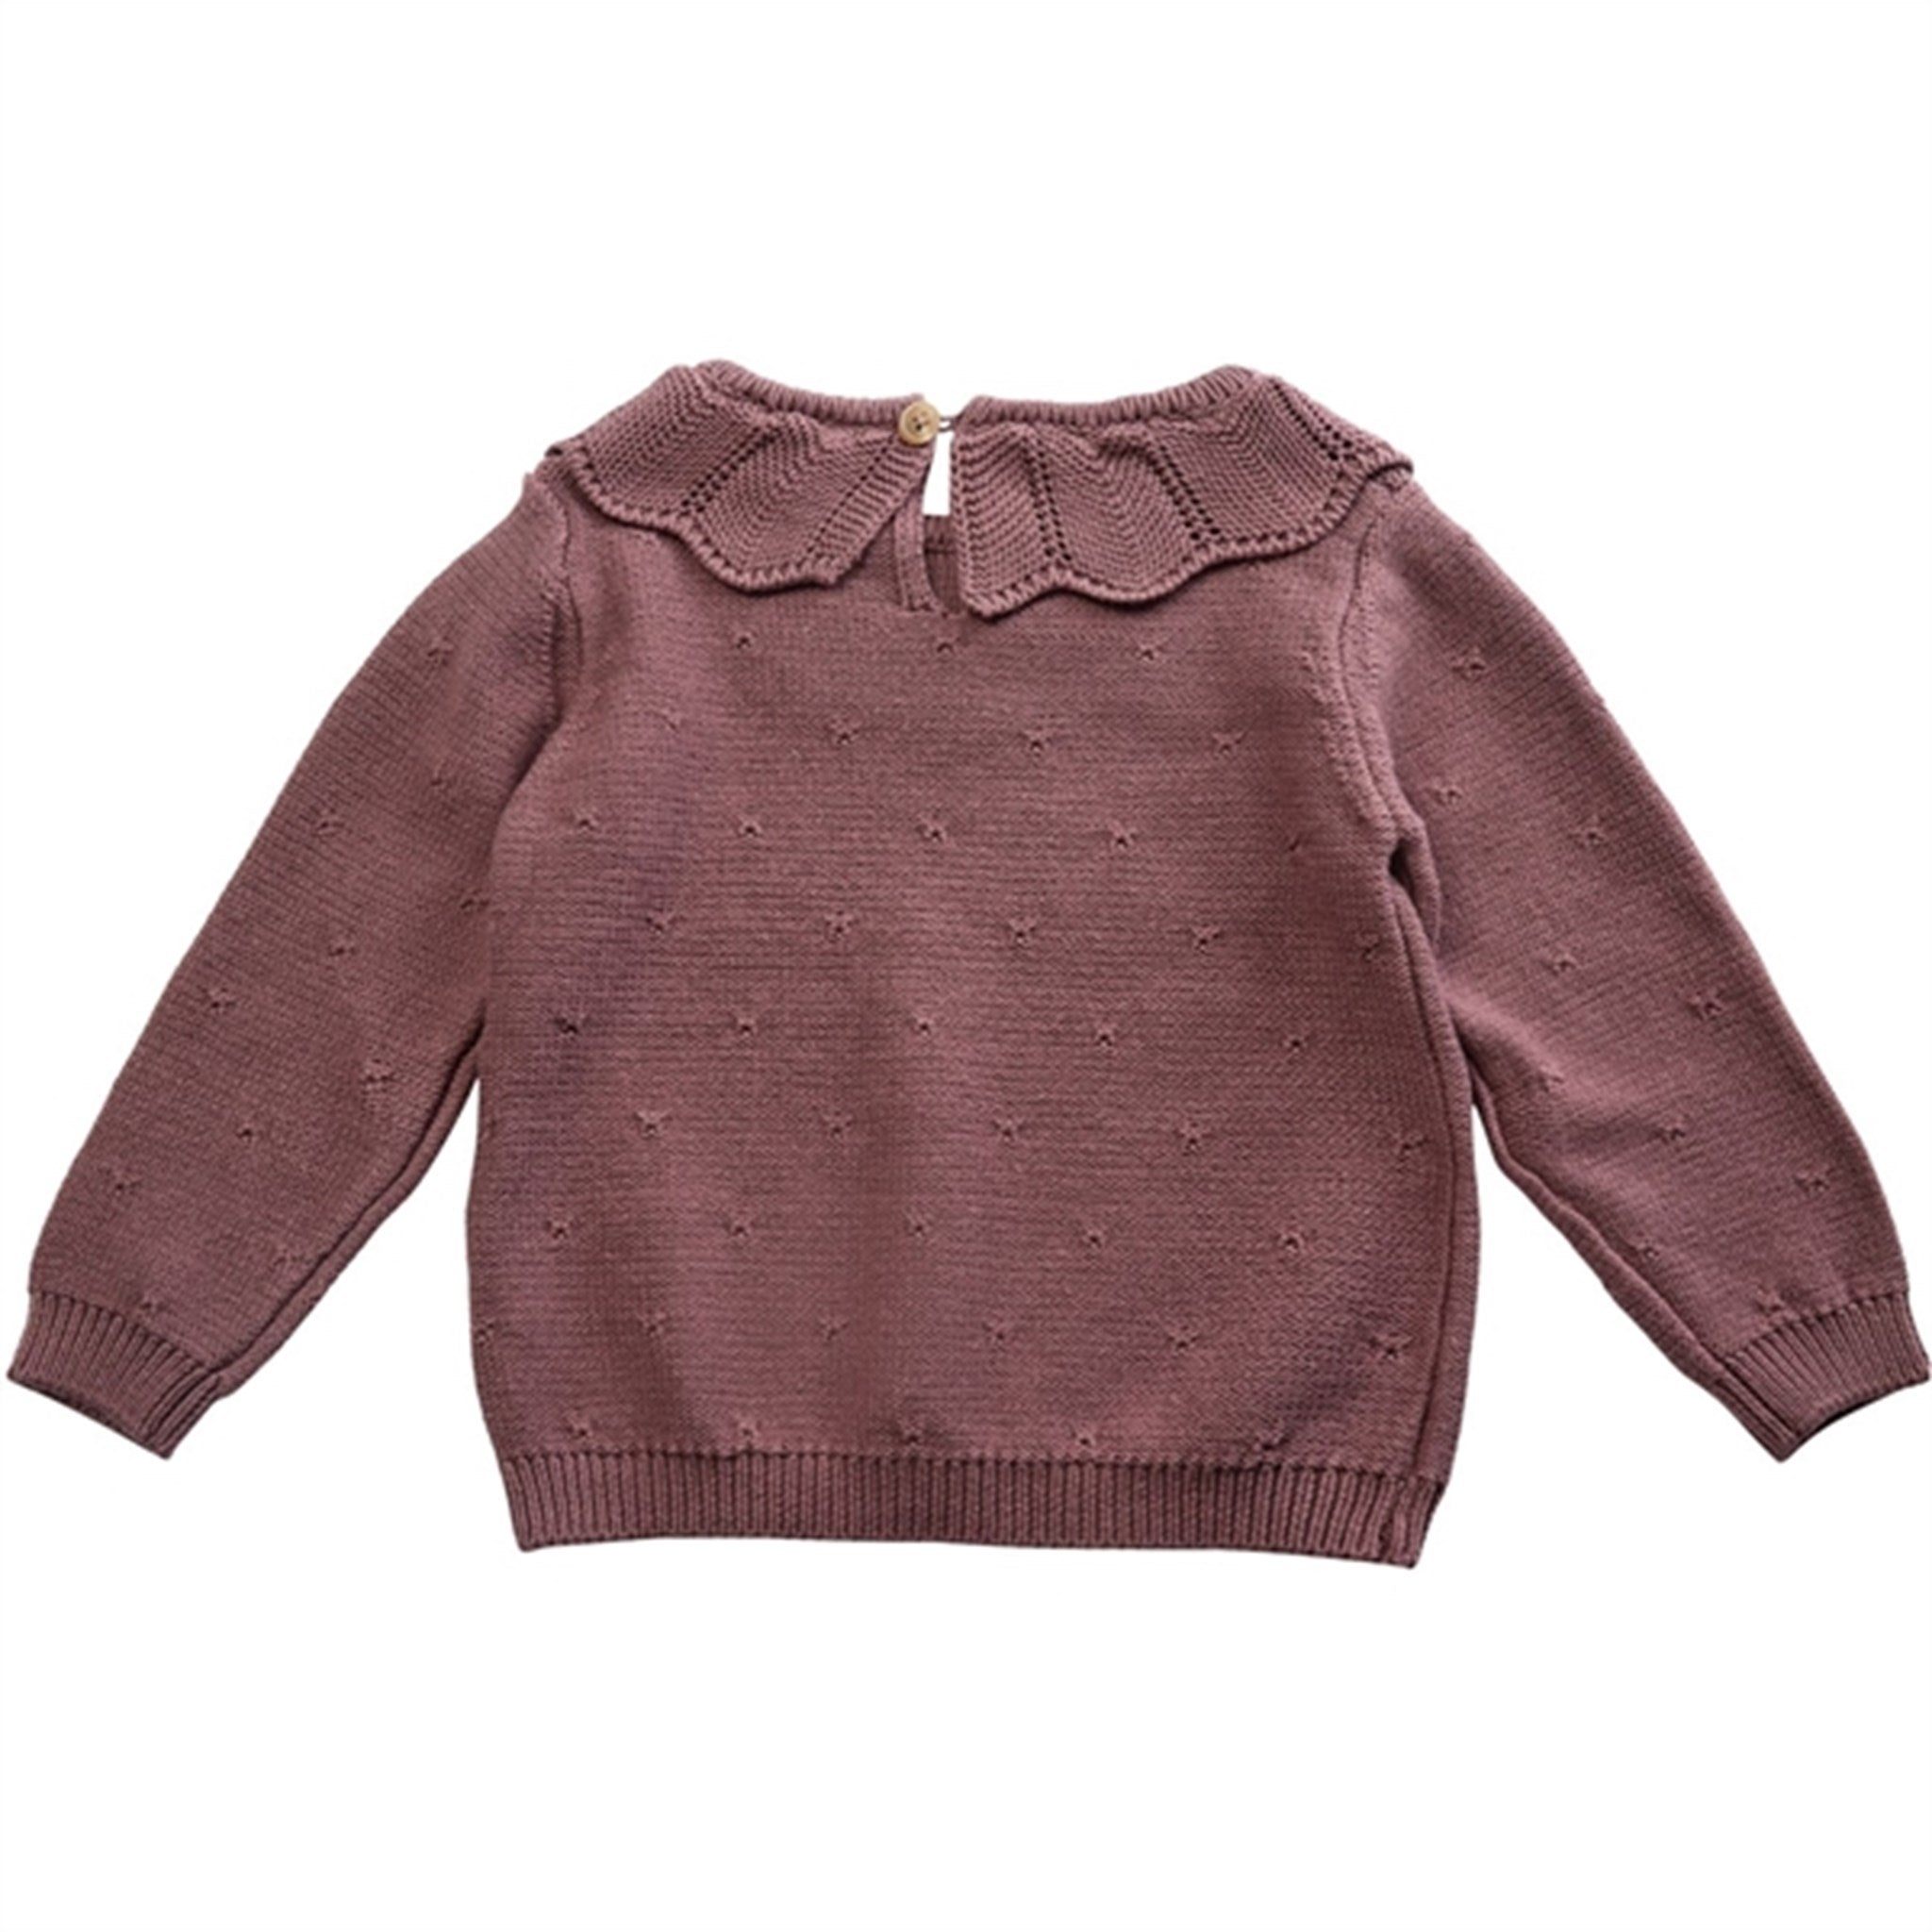 Sofie Schnoor Bright Lilac Knit 3